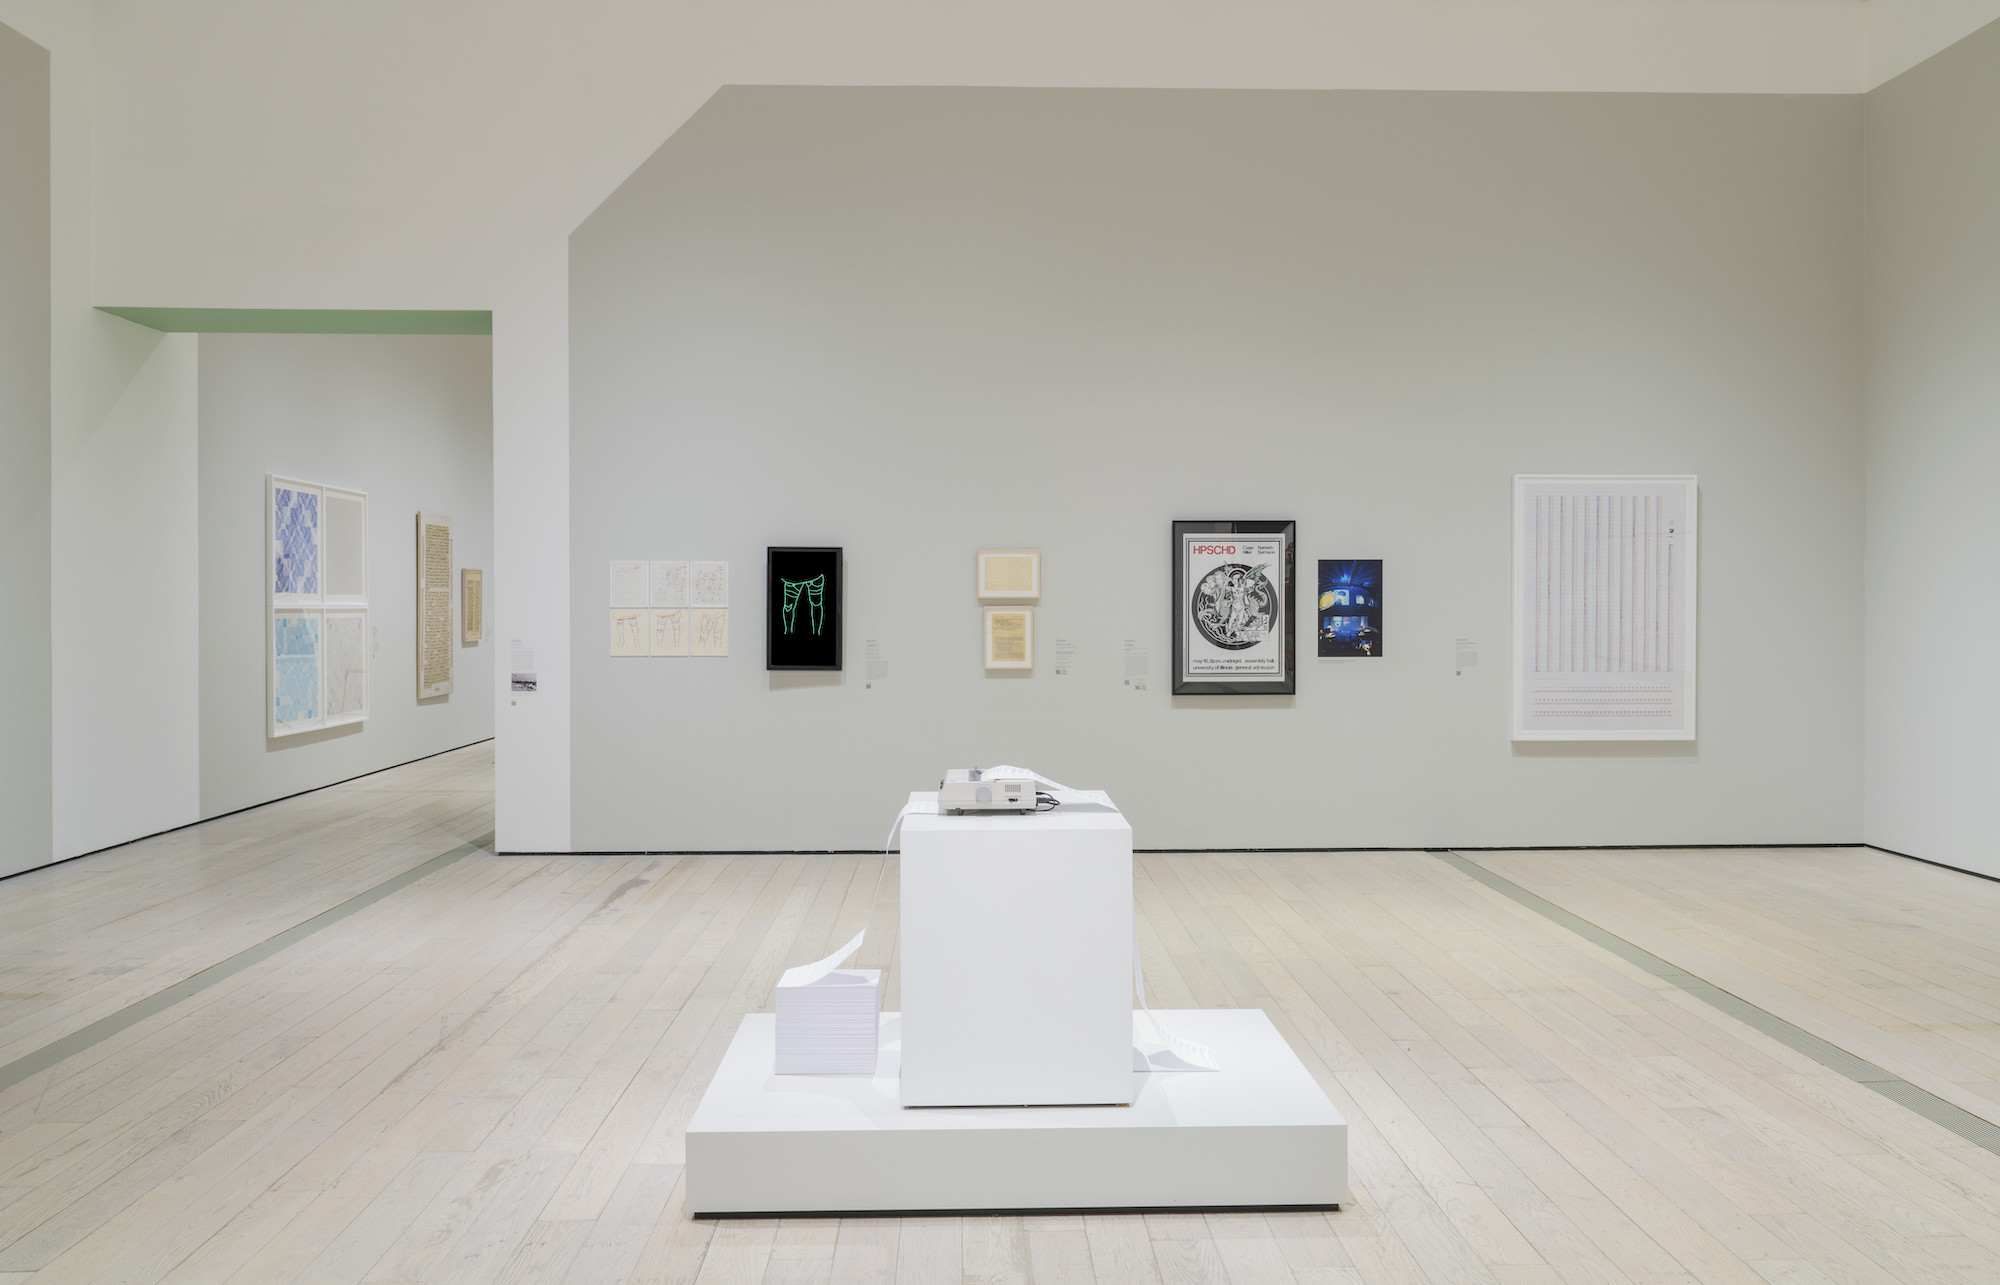 A view of this sterile museum with white walls, white pedestals and framed pieces in the background.